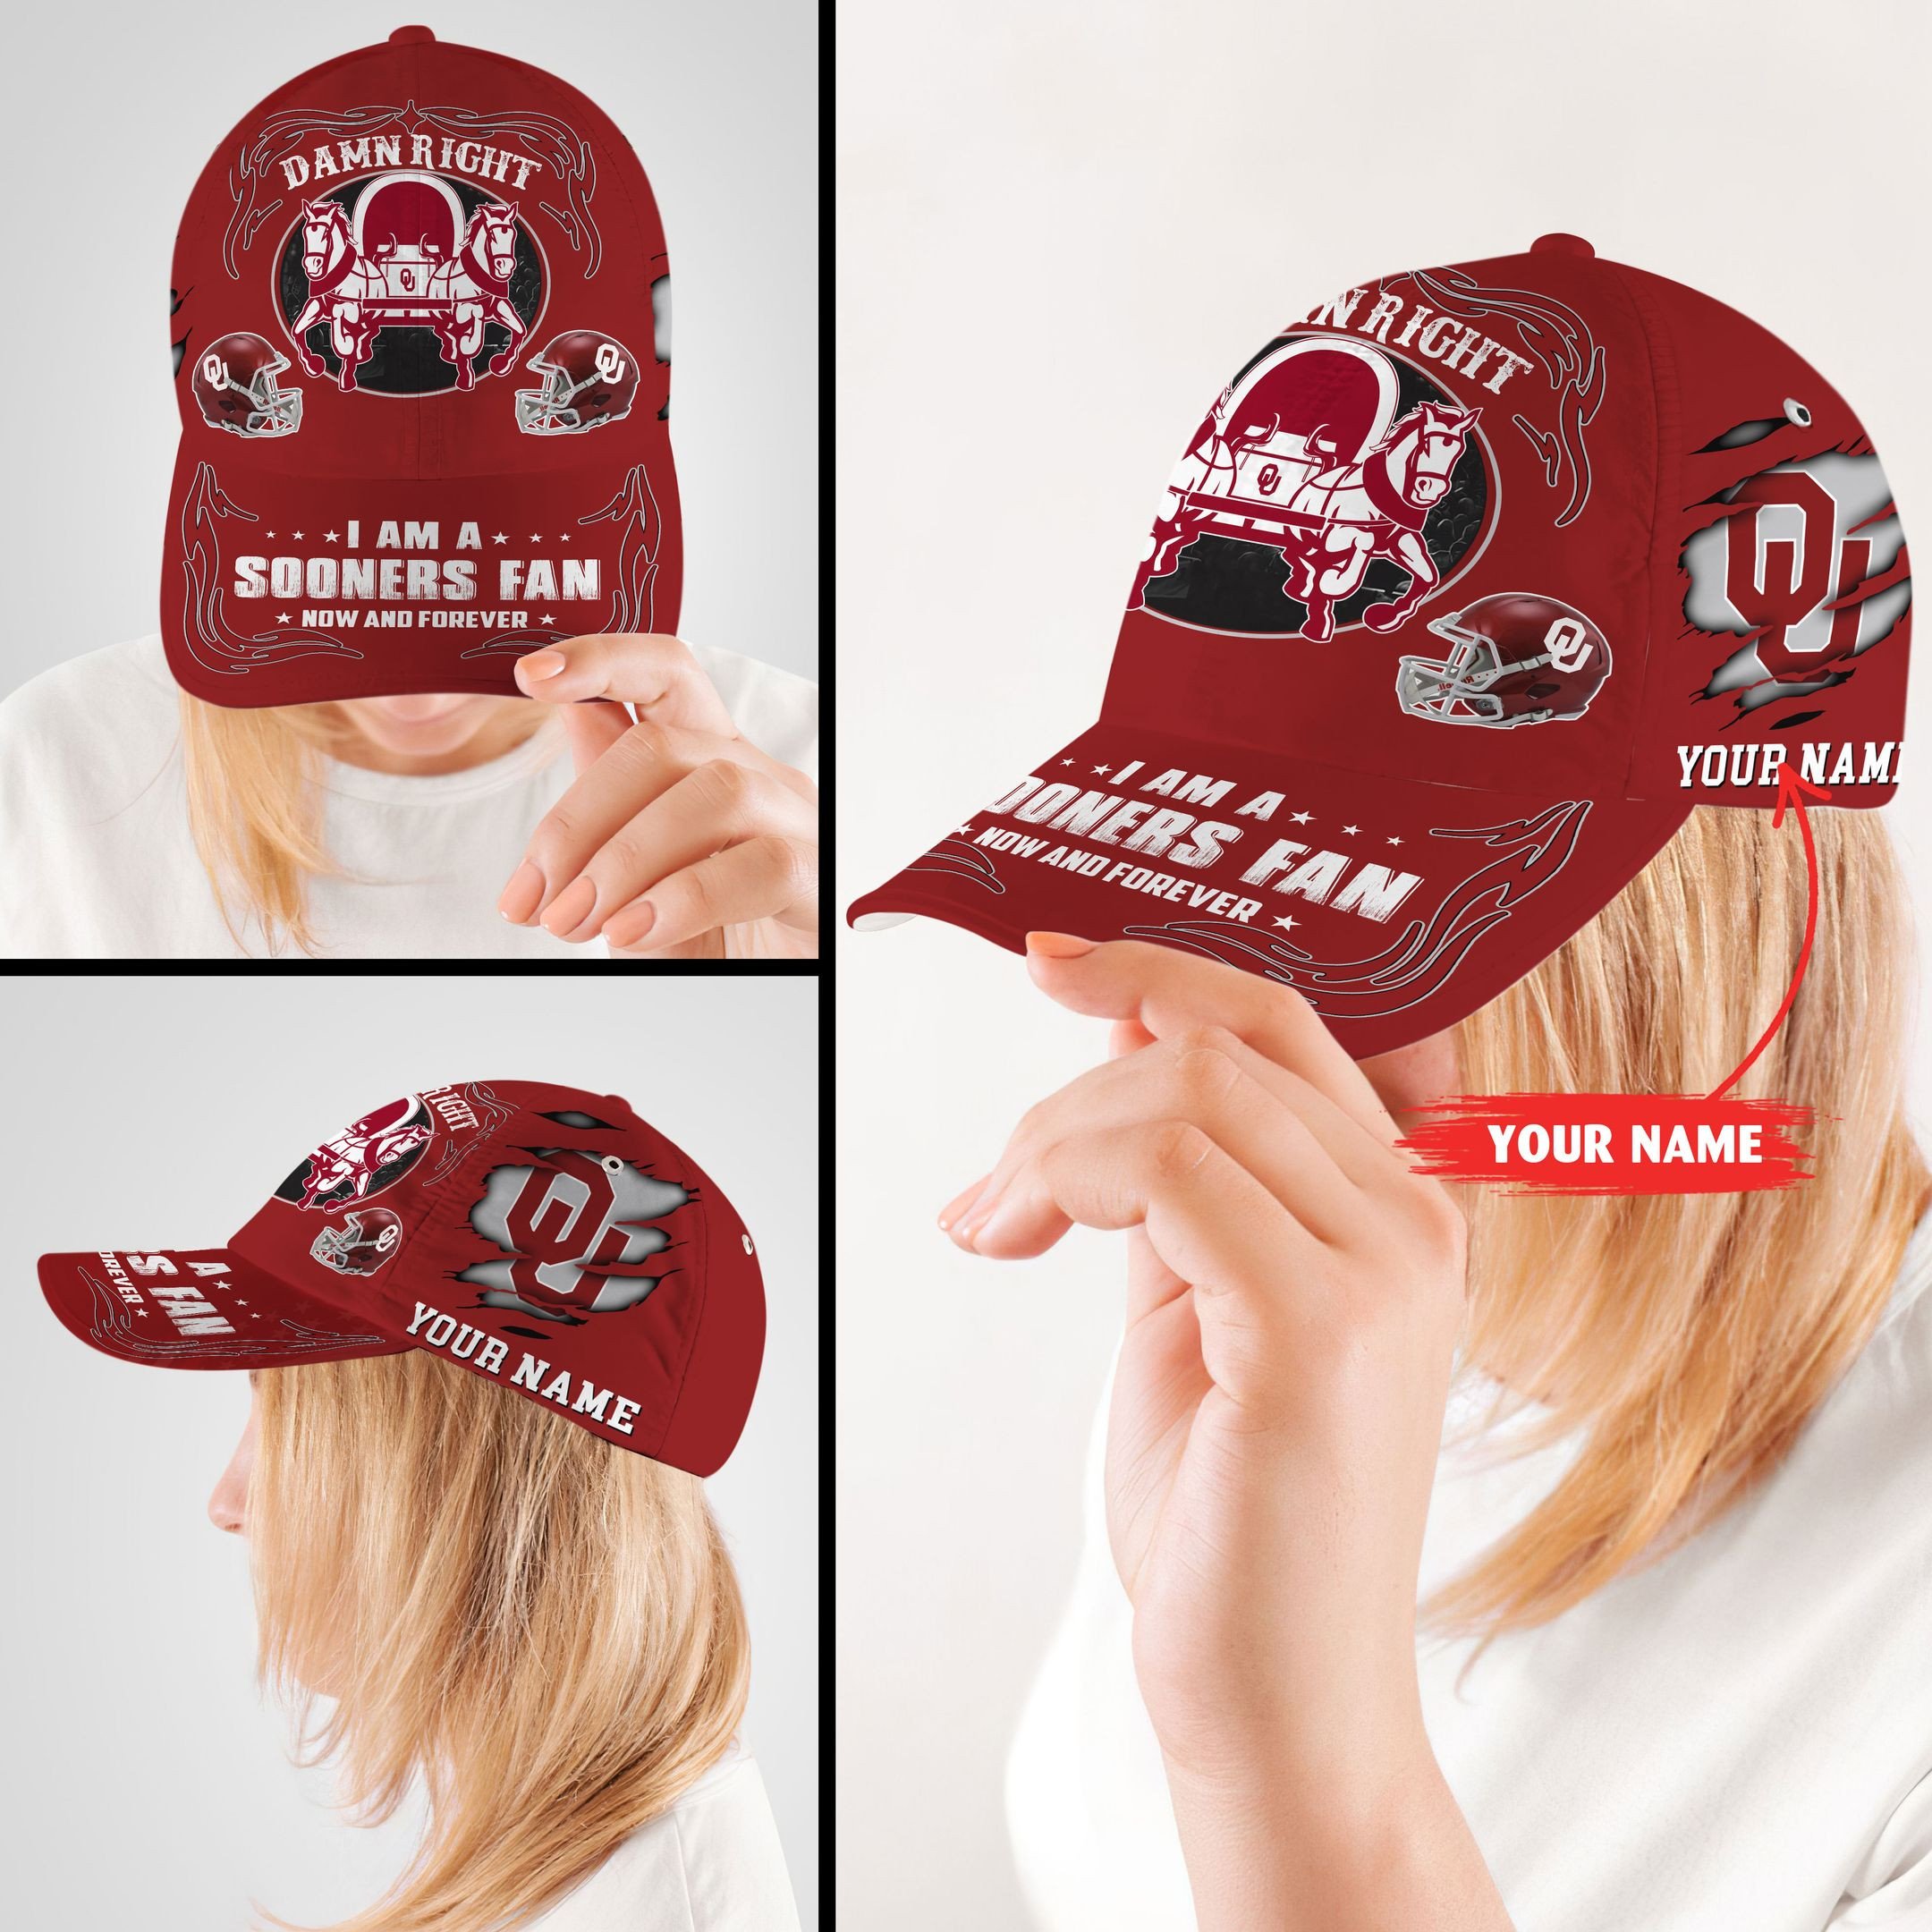 NEW Personalized Damn Right I am a Oklahoma Sooners fan now and forever hat cap 5